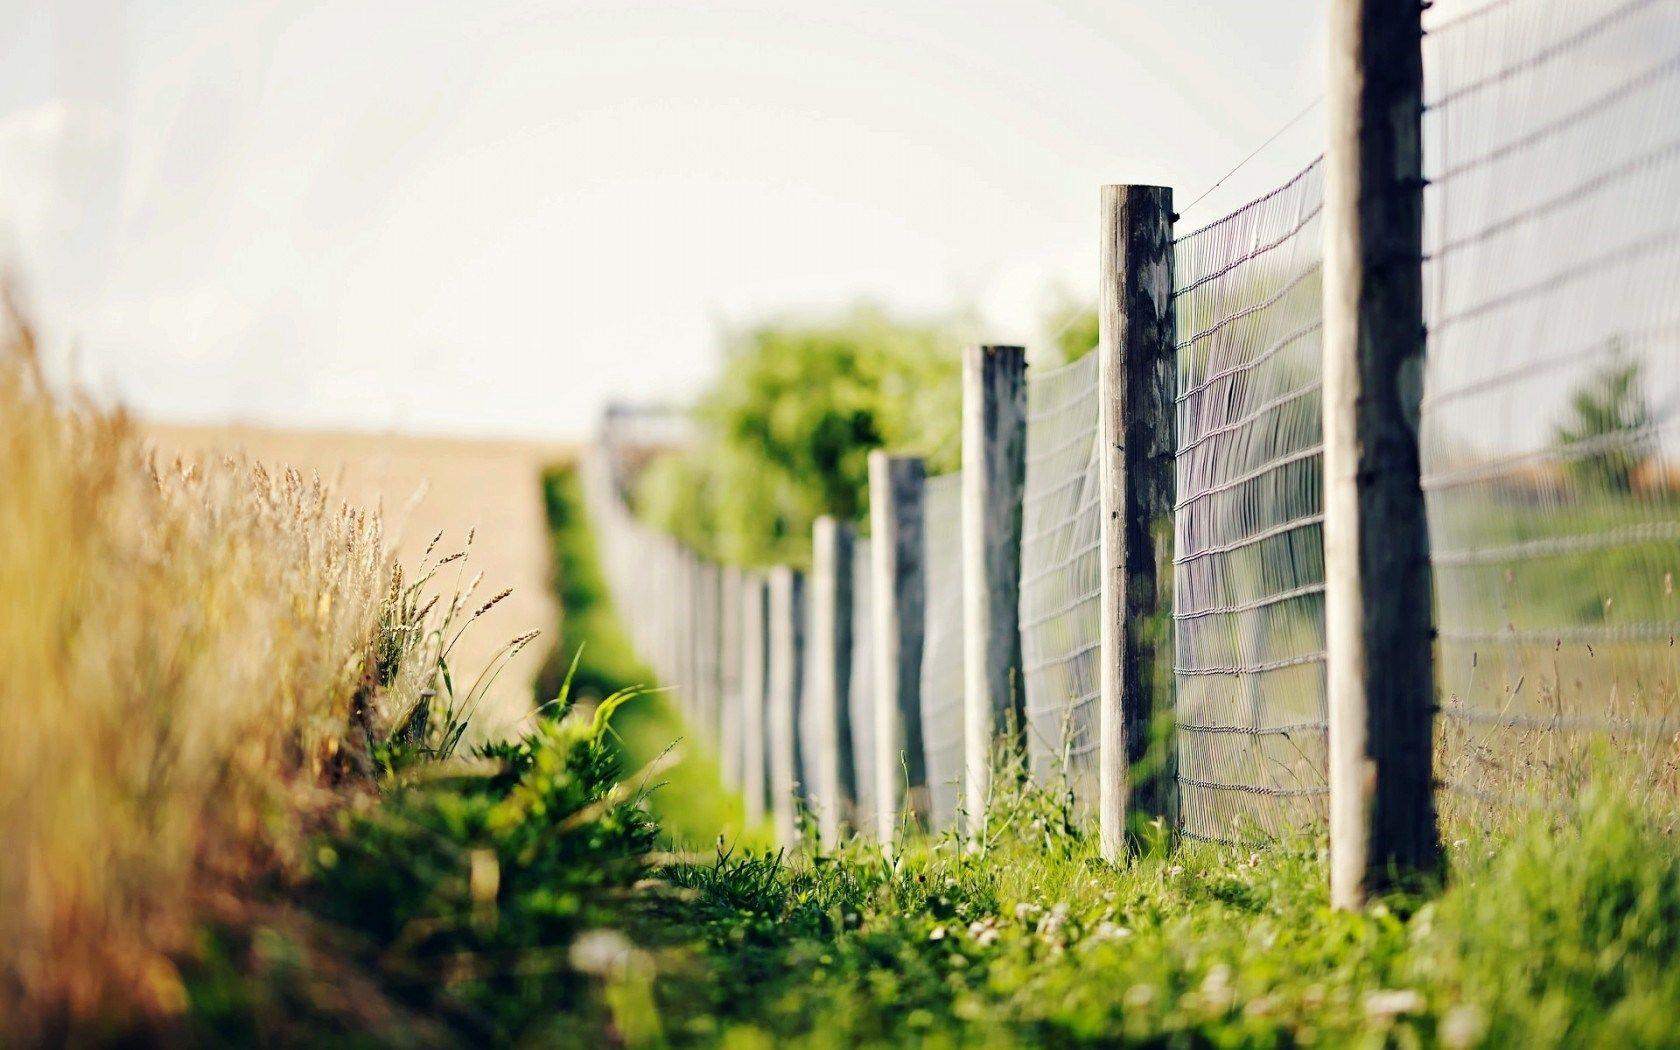 HD Country Fence Wallpaper and Photo. HD Nature Wallpaper